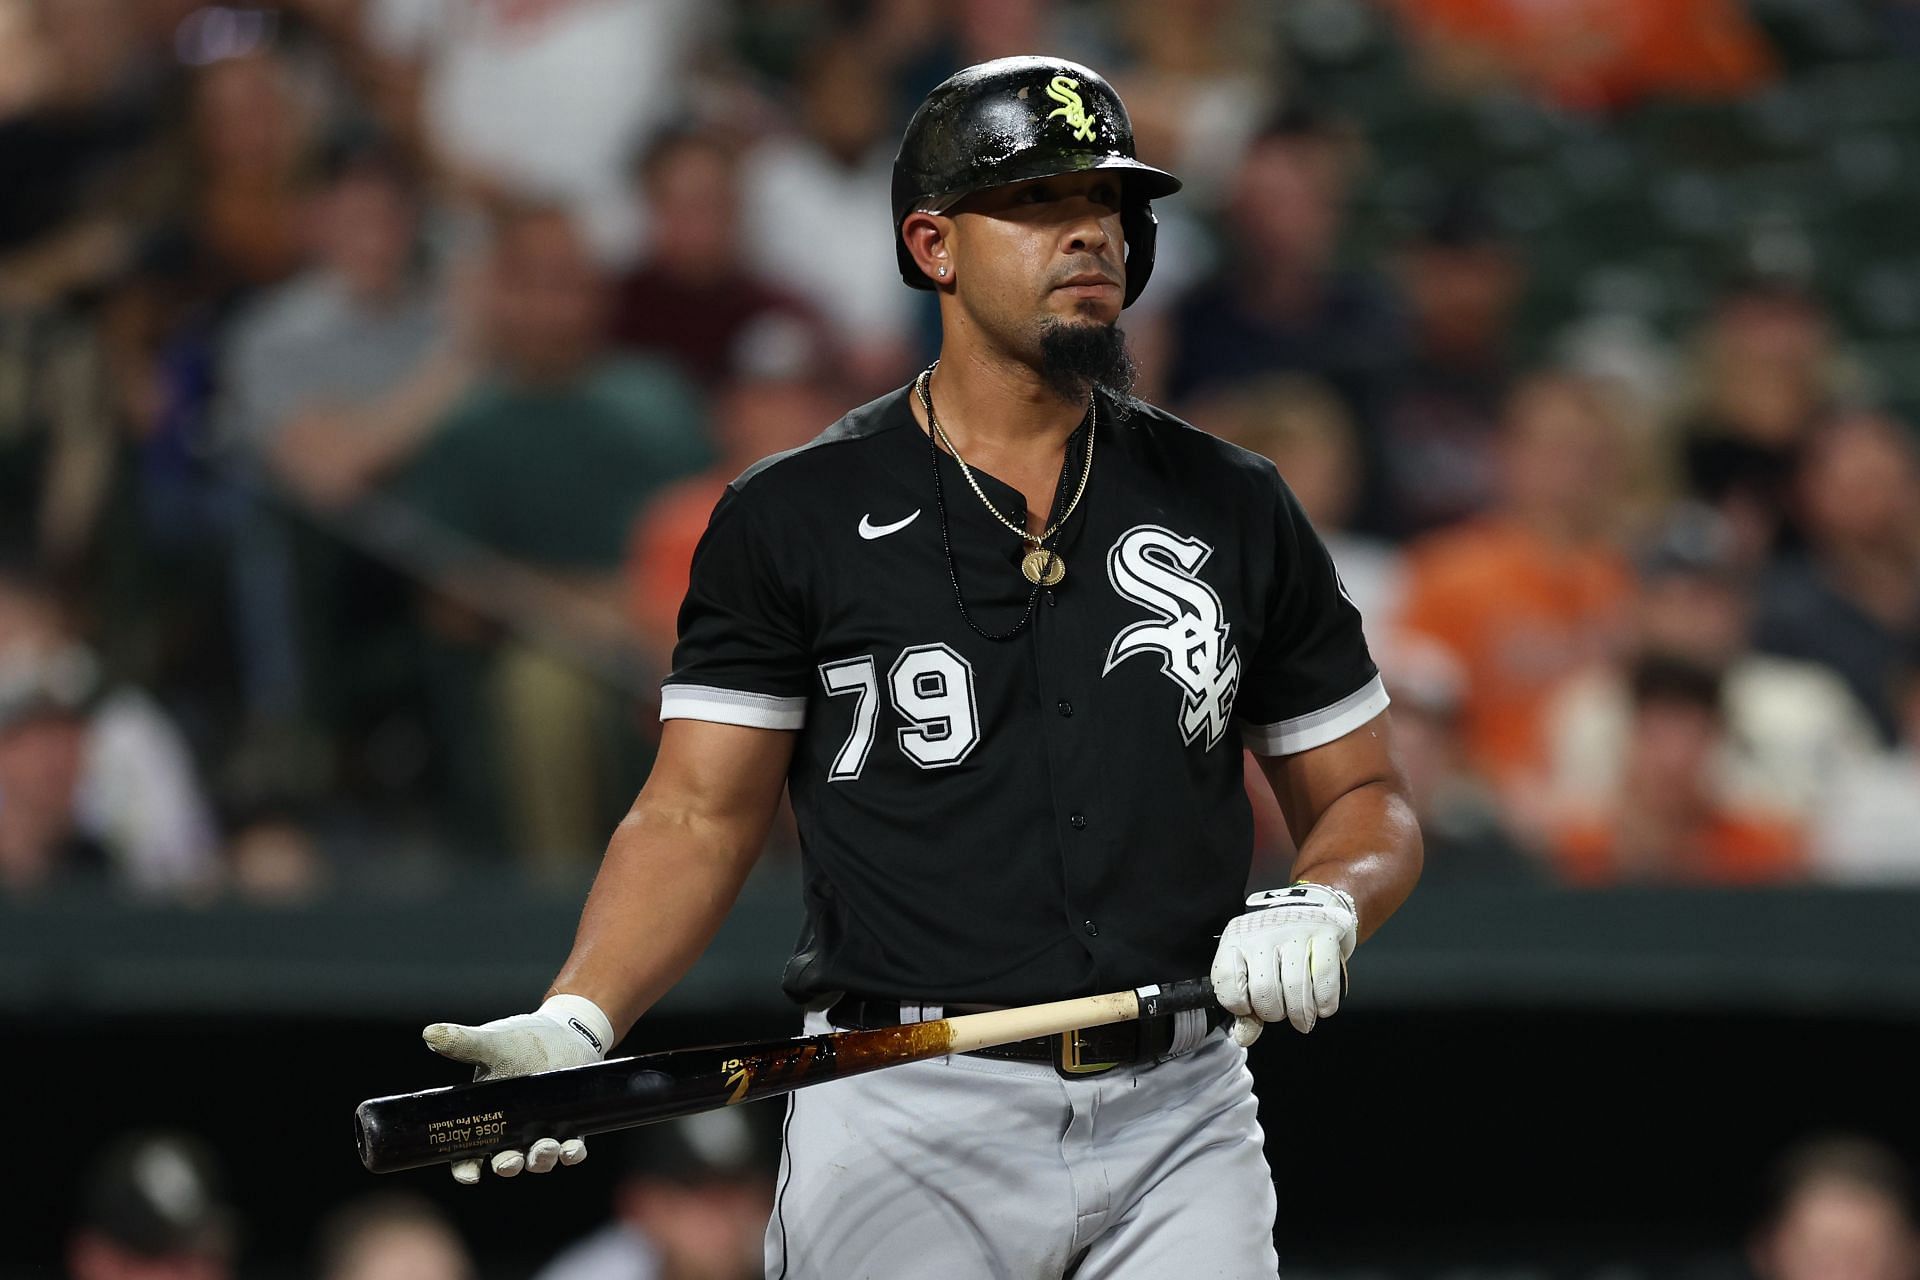 Jose Abreu defection from Cuba detailed in Chicago Magazine story